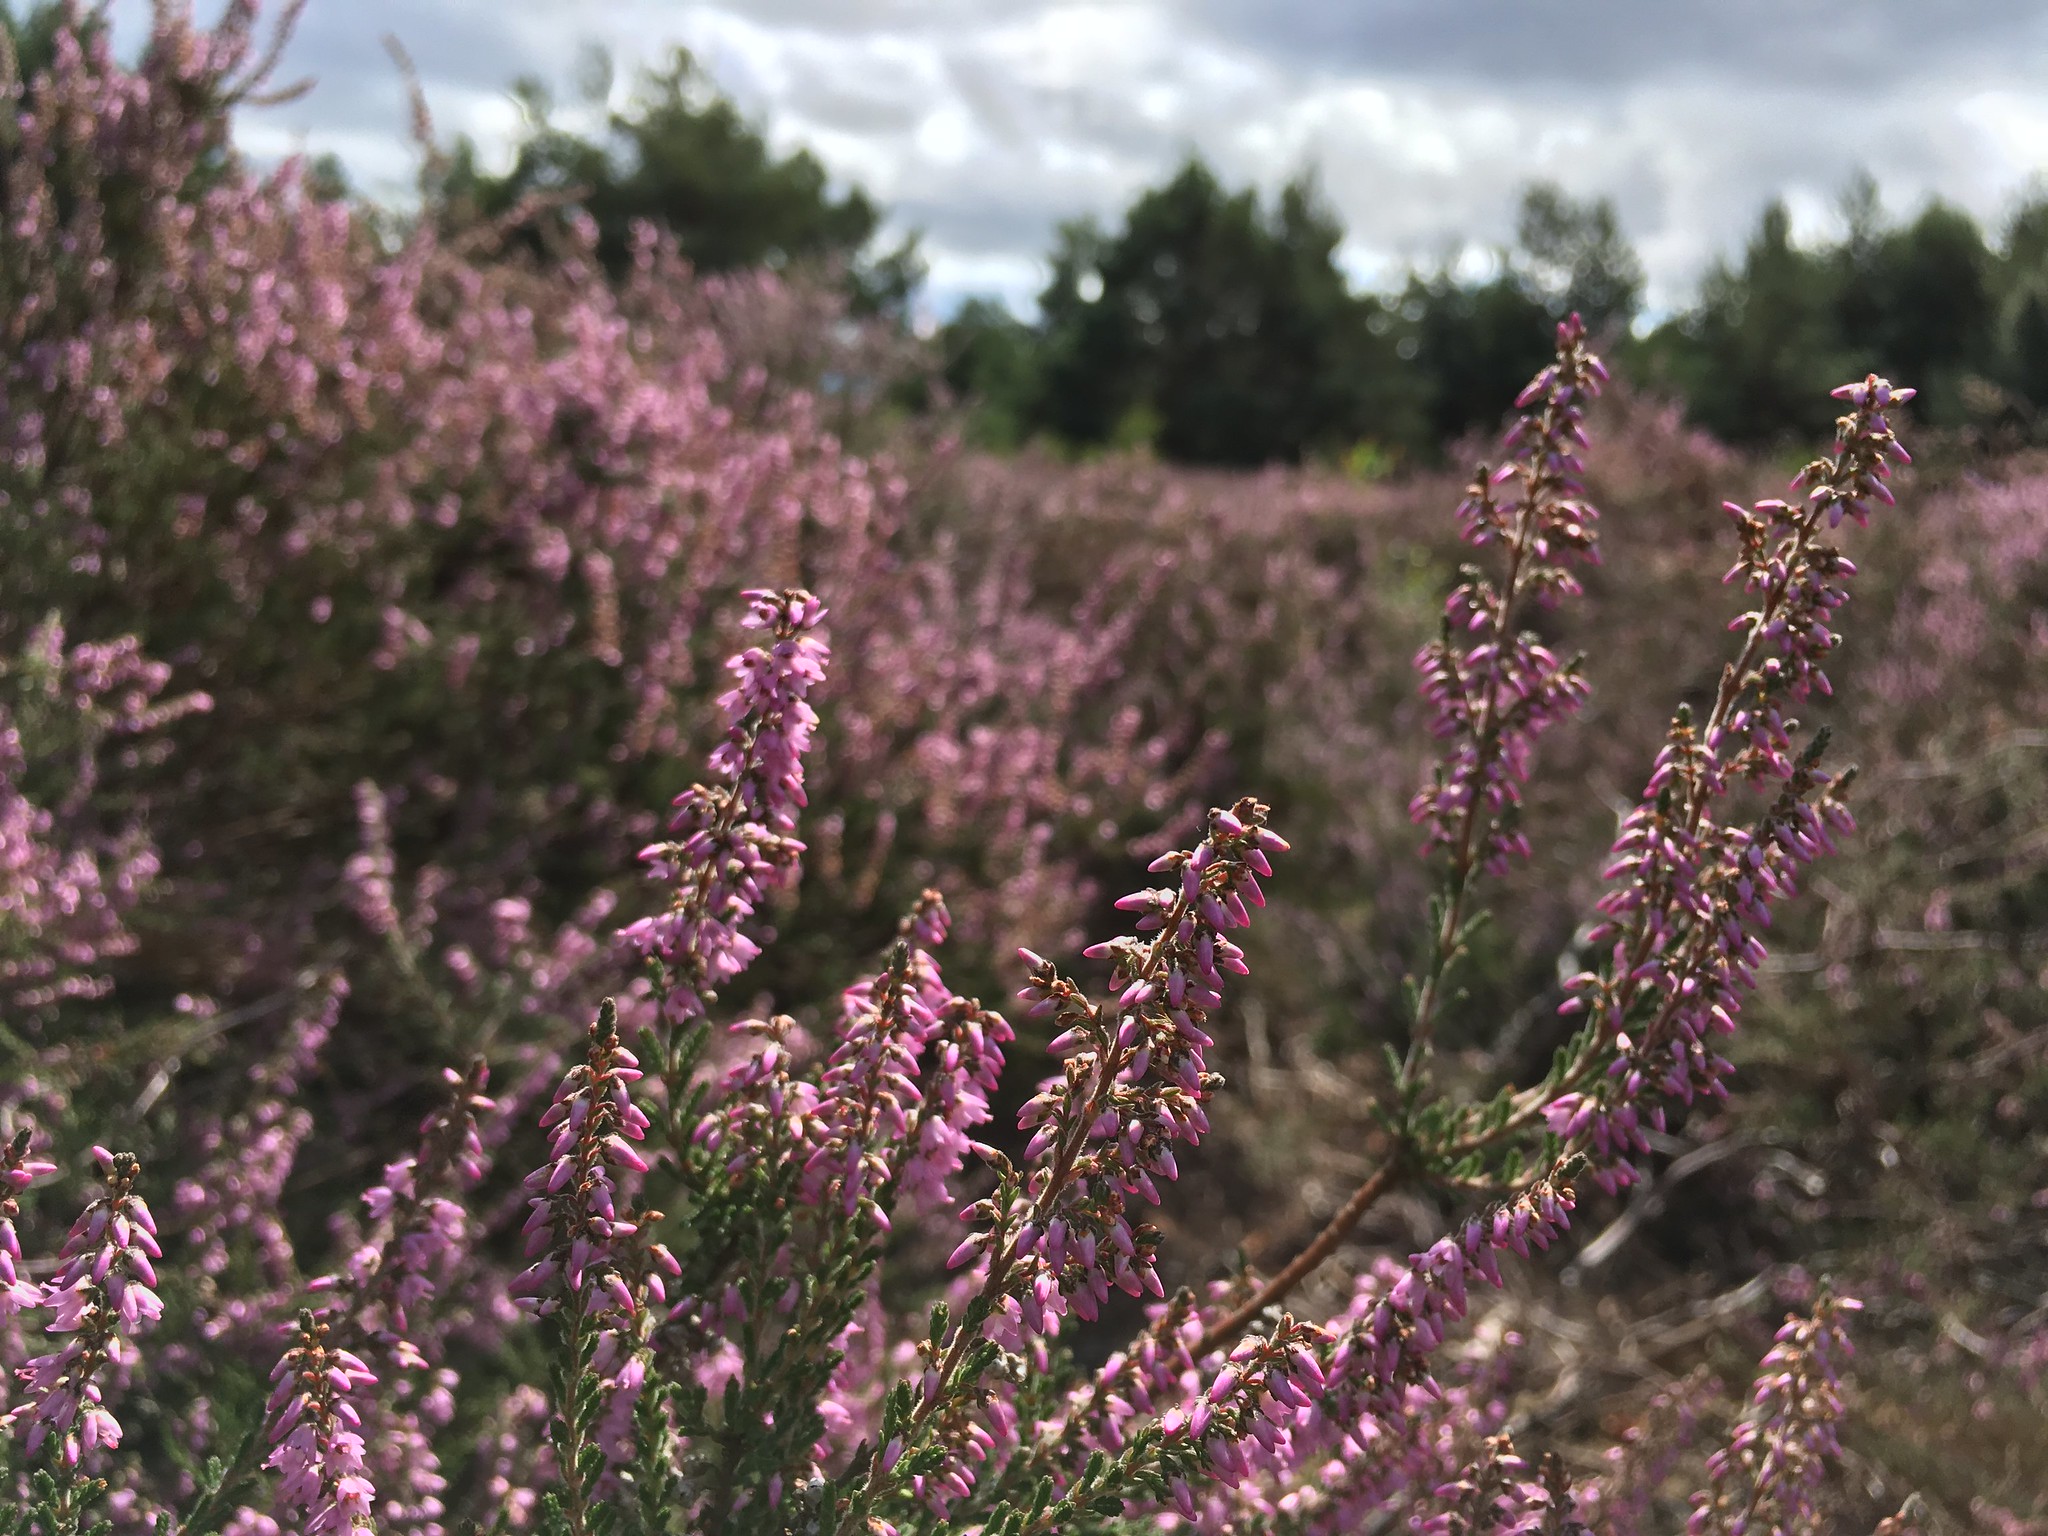 Photograph of common heather in bloom